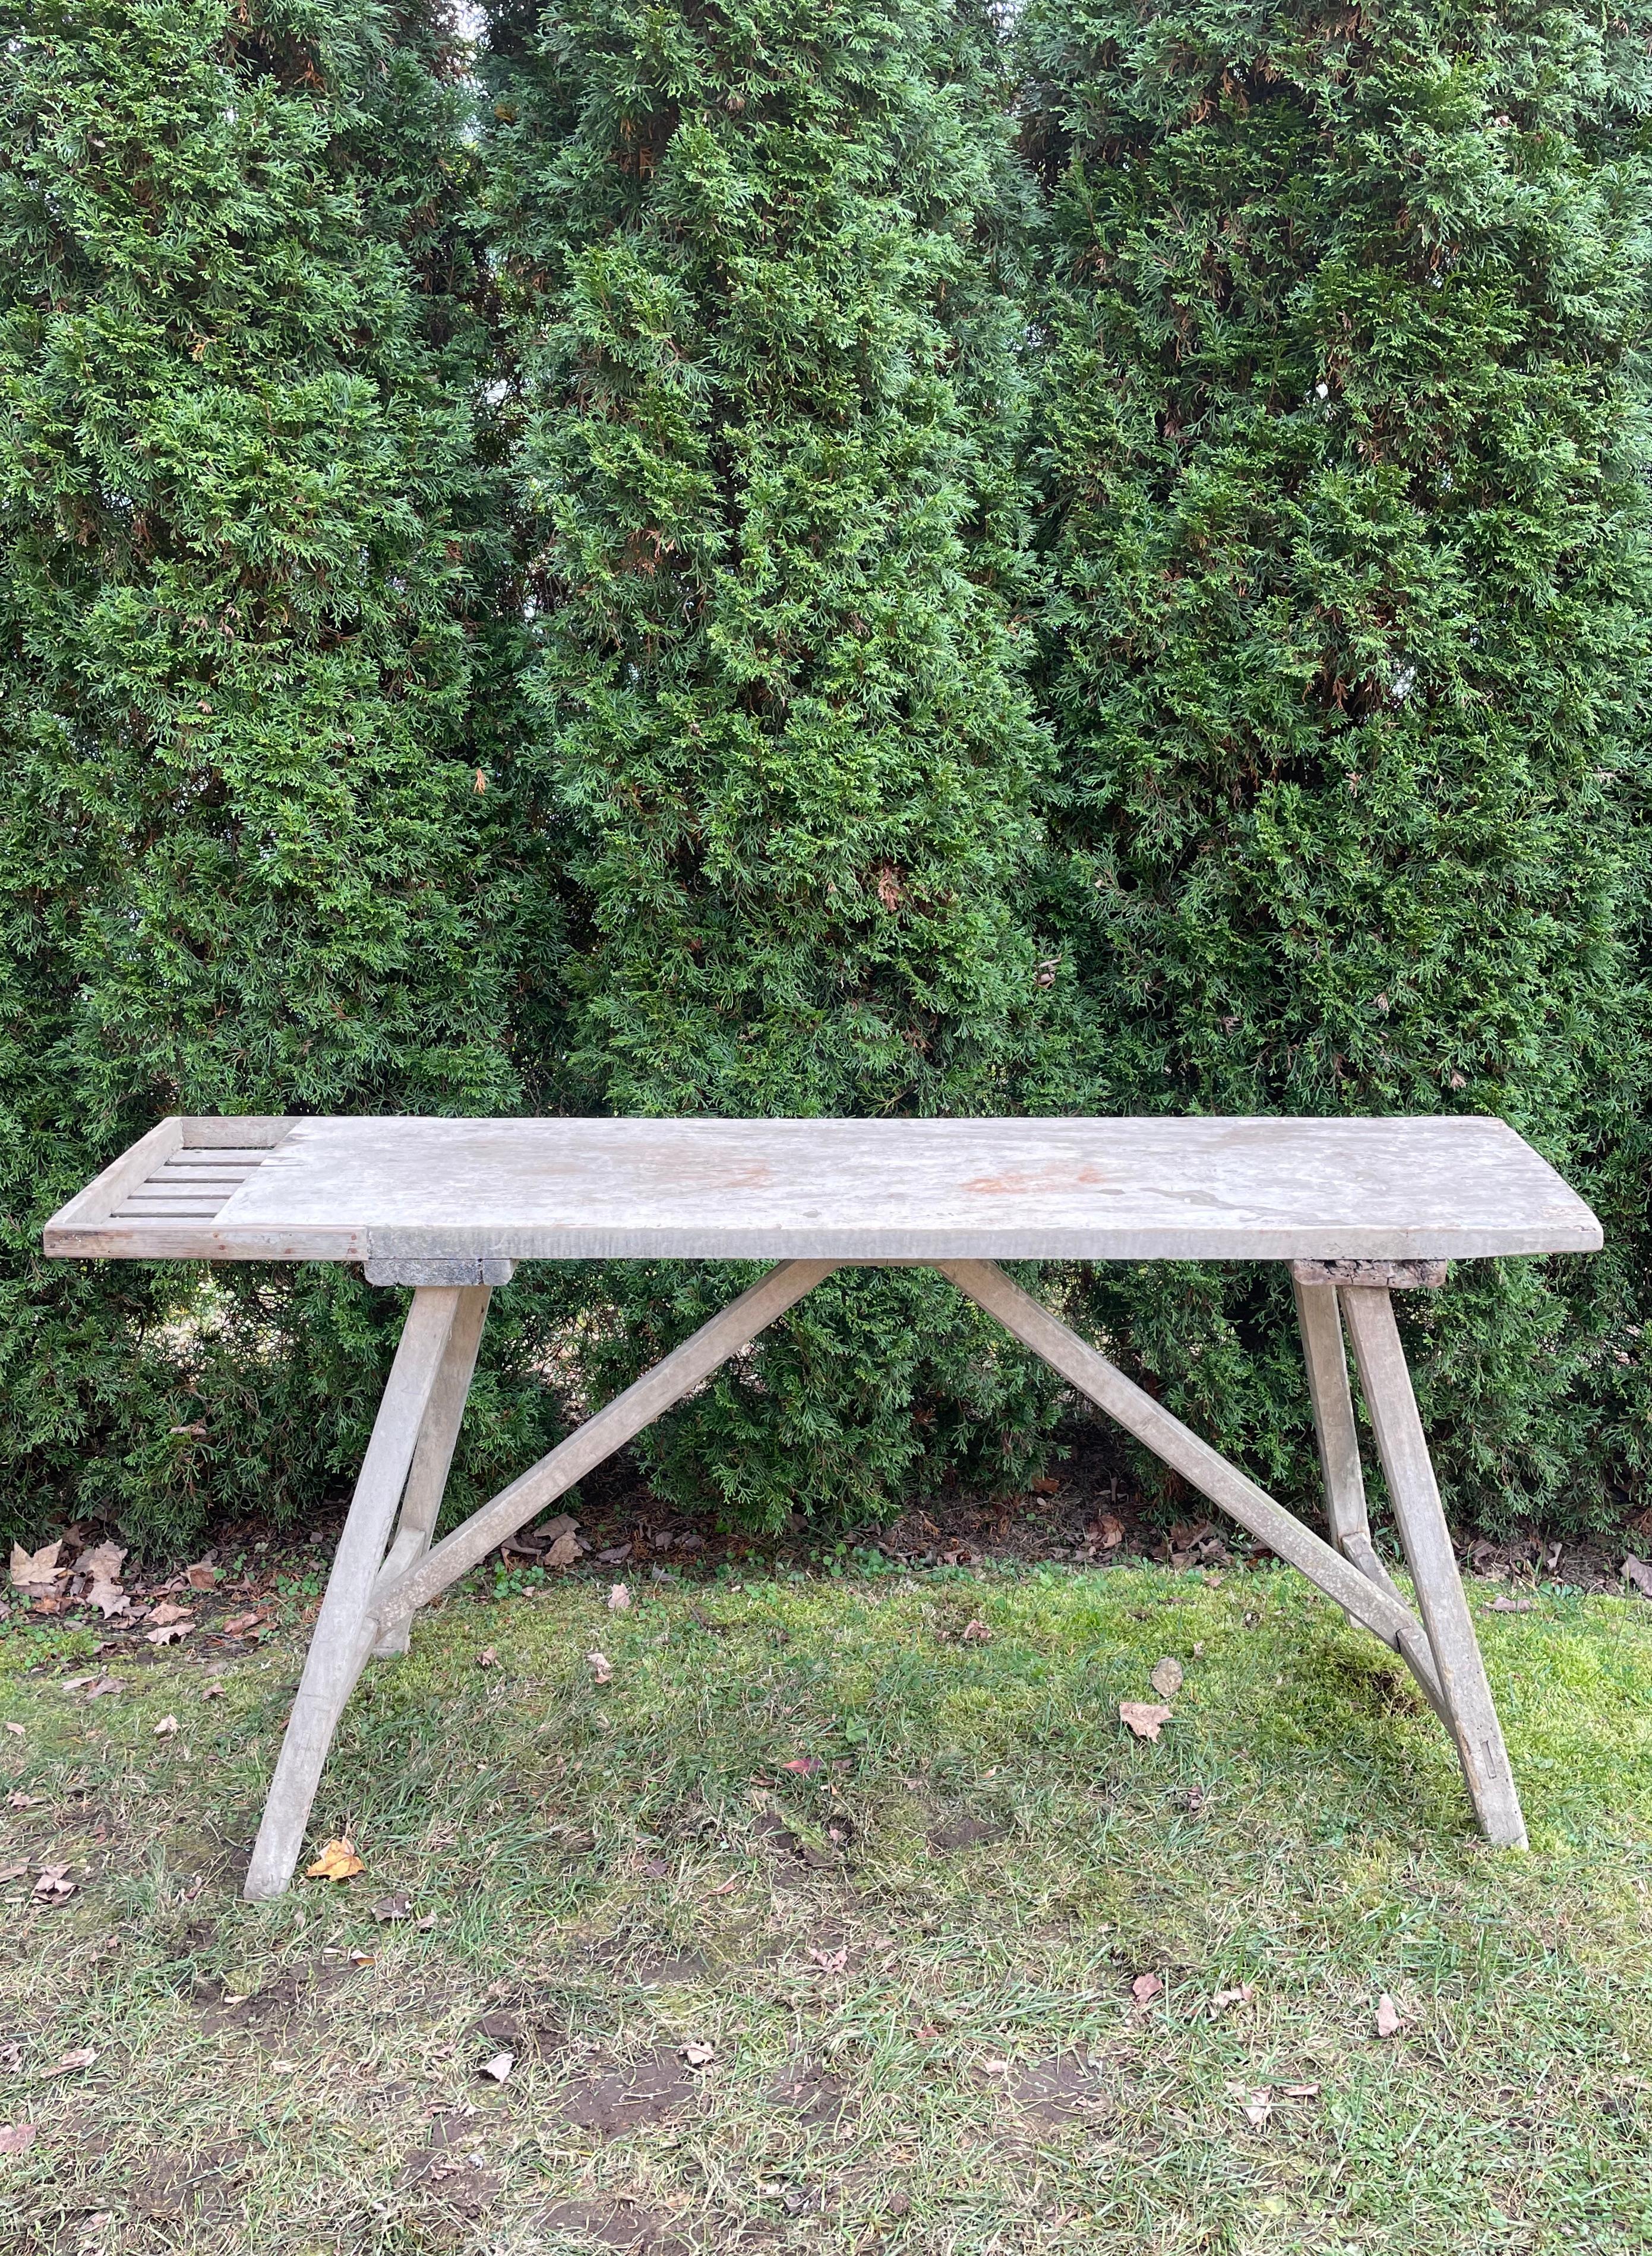 We love French washing tables and this one is most unusual. The slotted extension to the top was used for holding soap and scrub brushes, but makes a great spot to store TV controls and the like. Made of pine, it has been scrubbed to a lovely pale